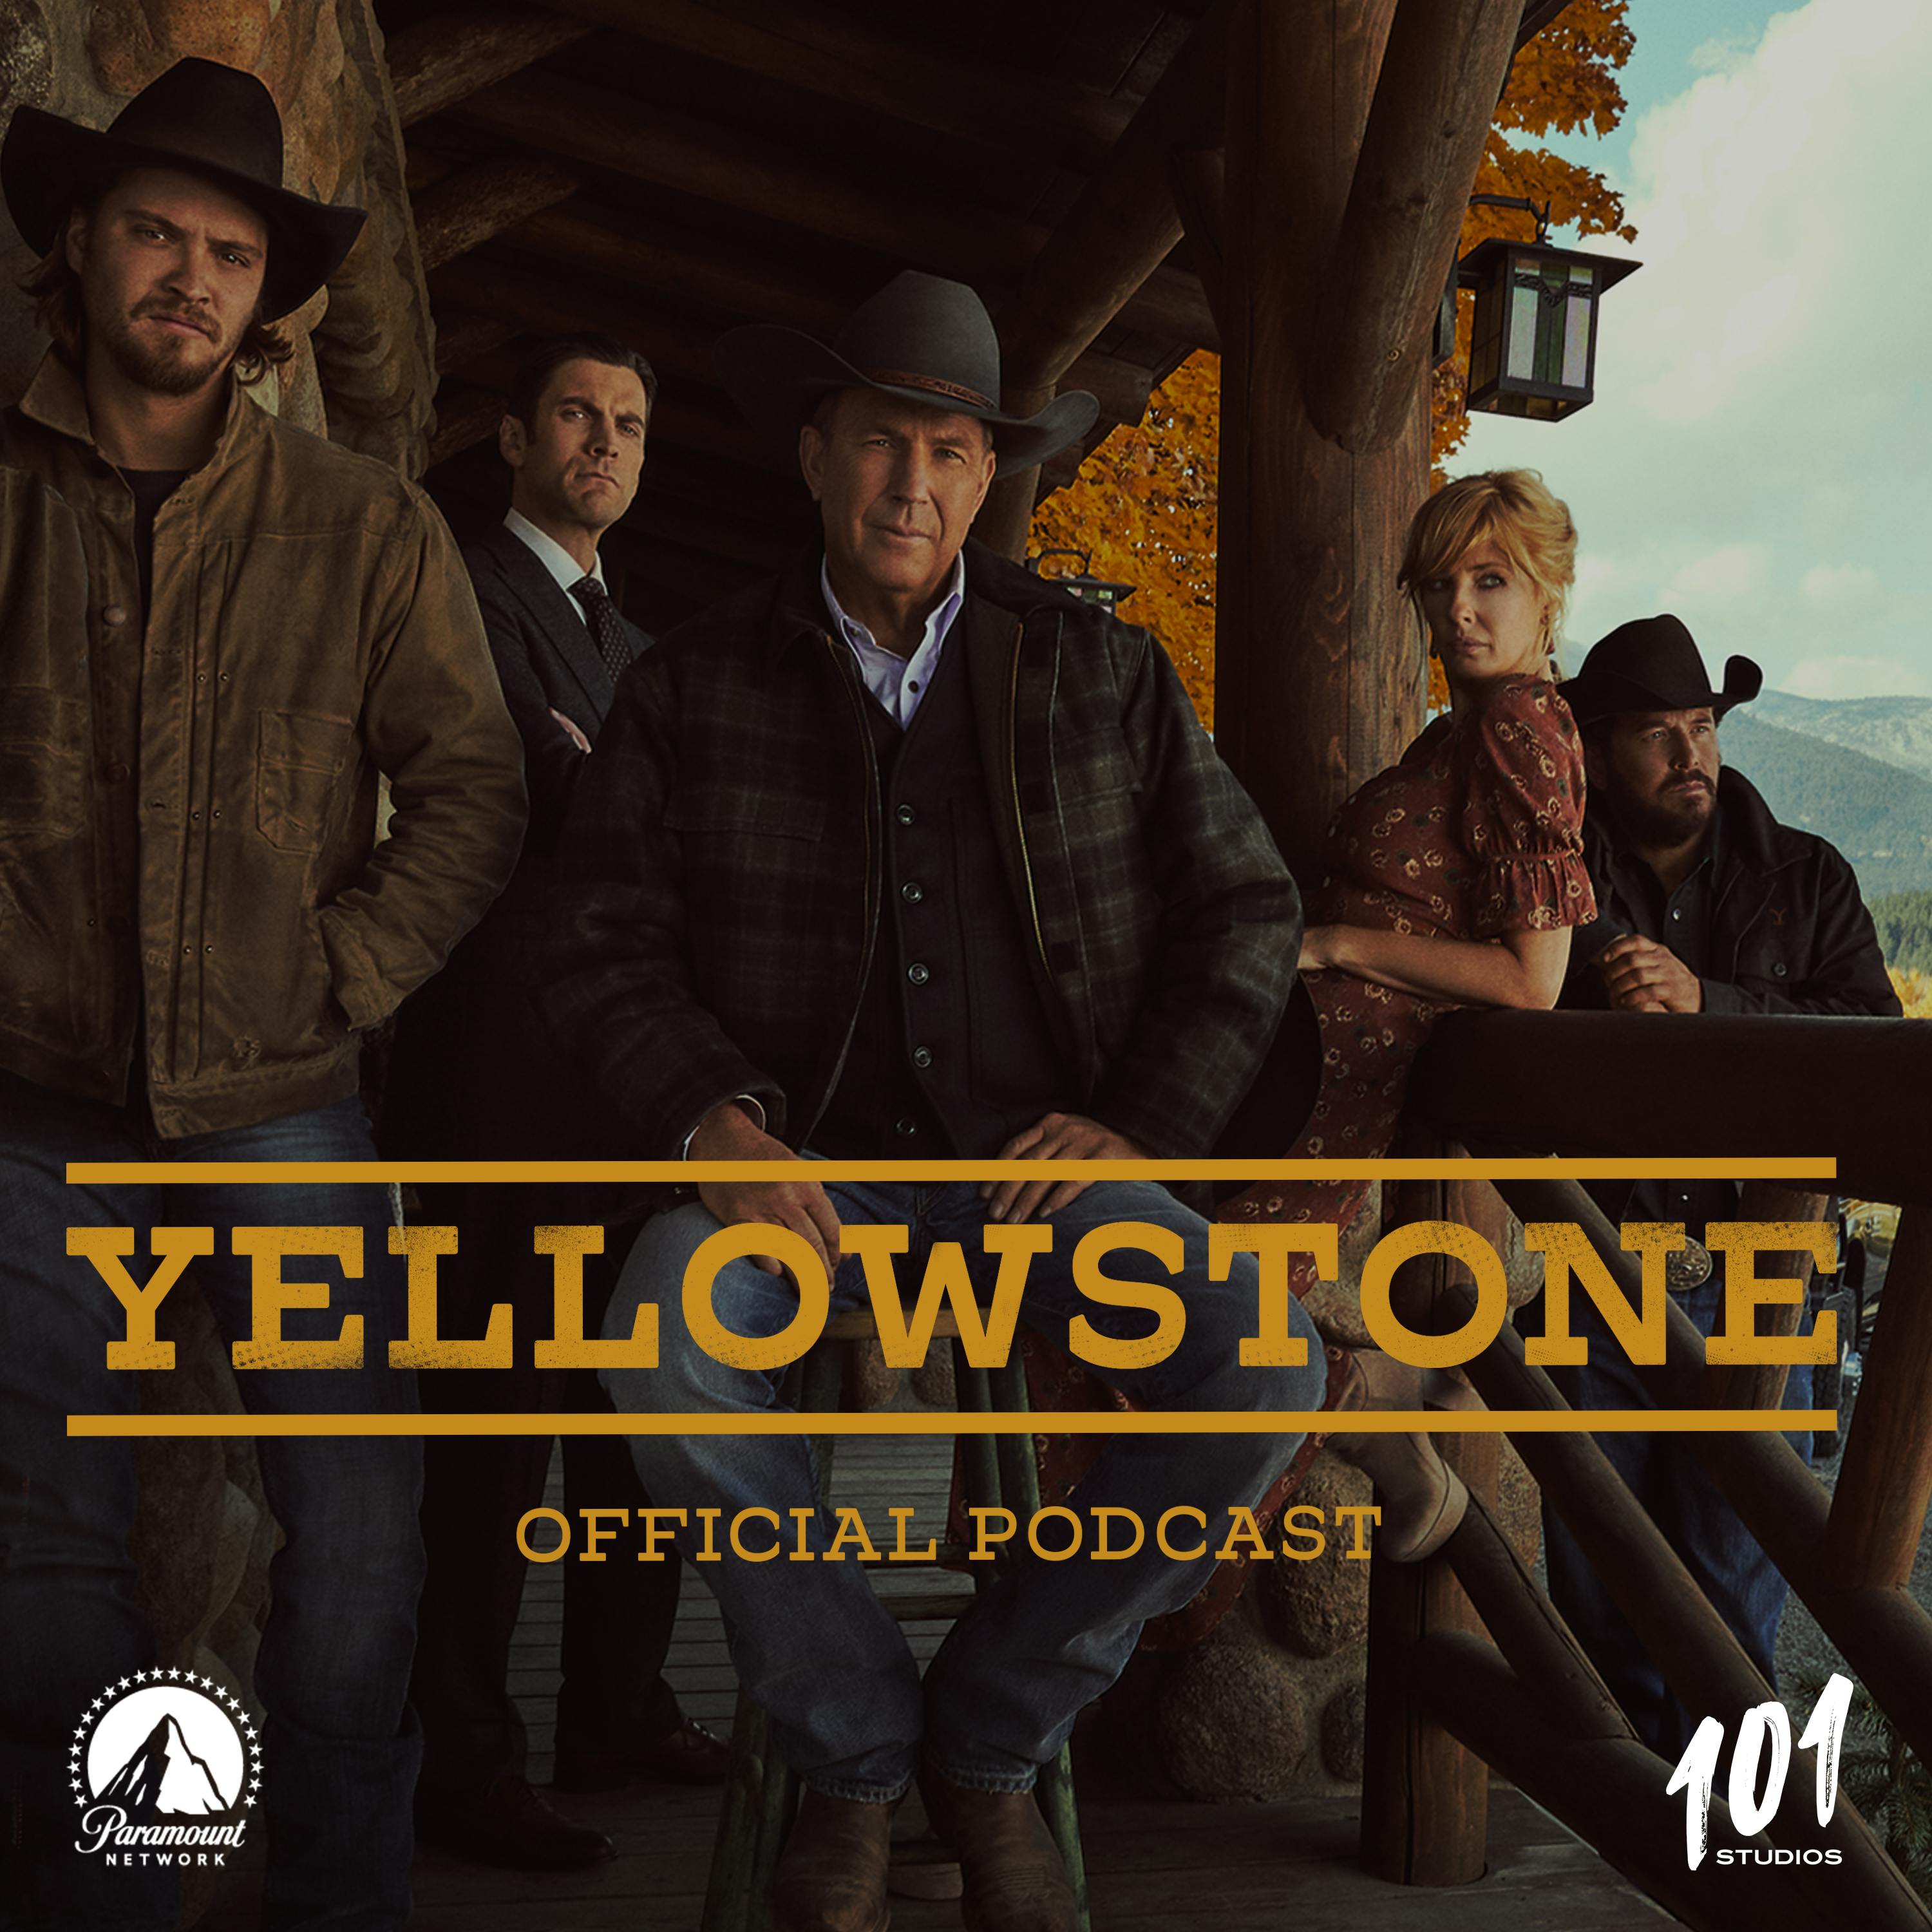 Yellowstone' honors star Buster Welch after his death